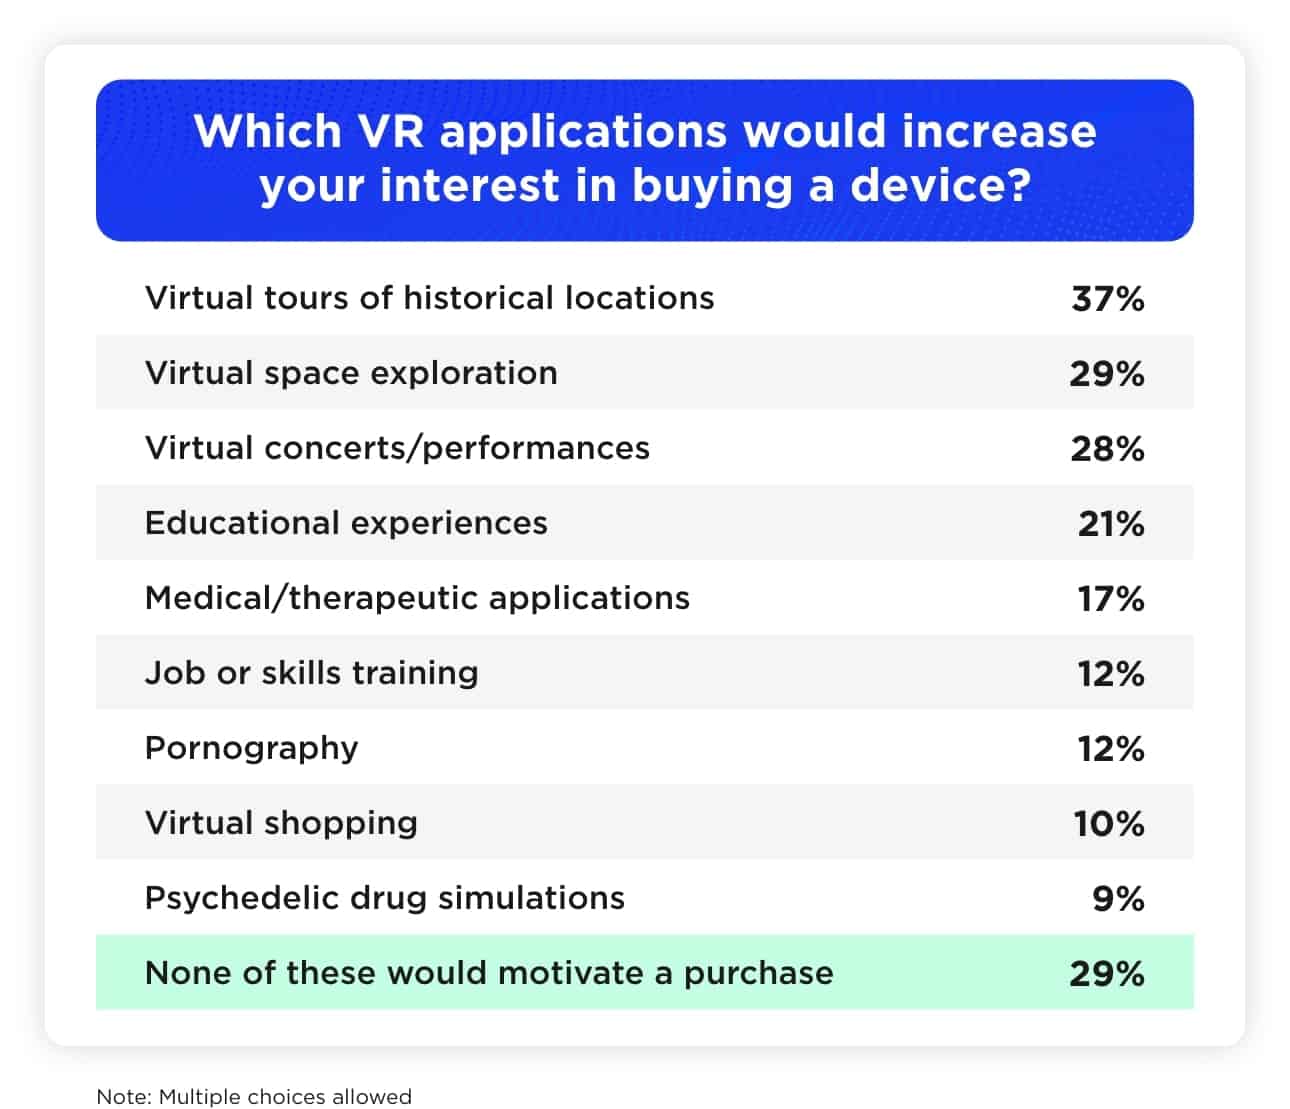 Which VR applications would increase your interest in buying a device?